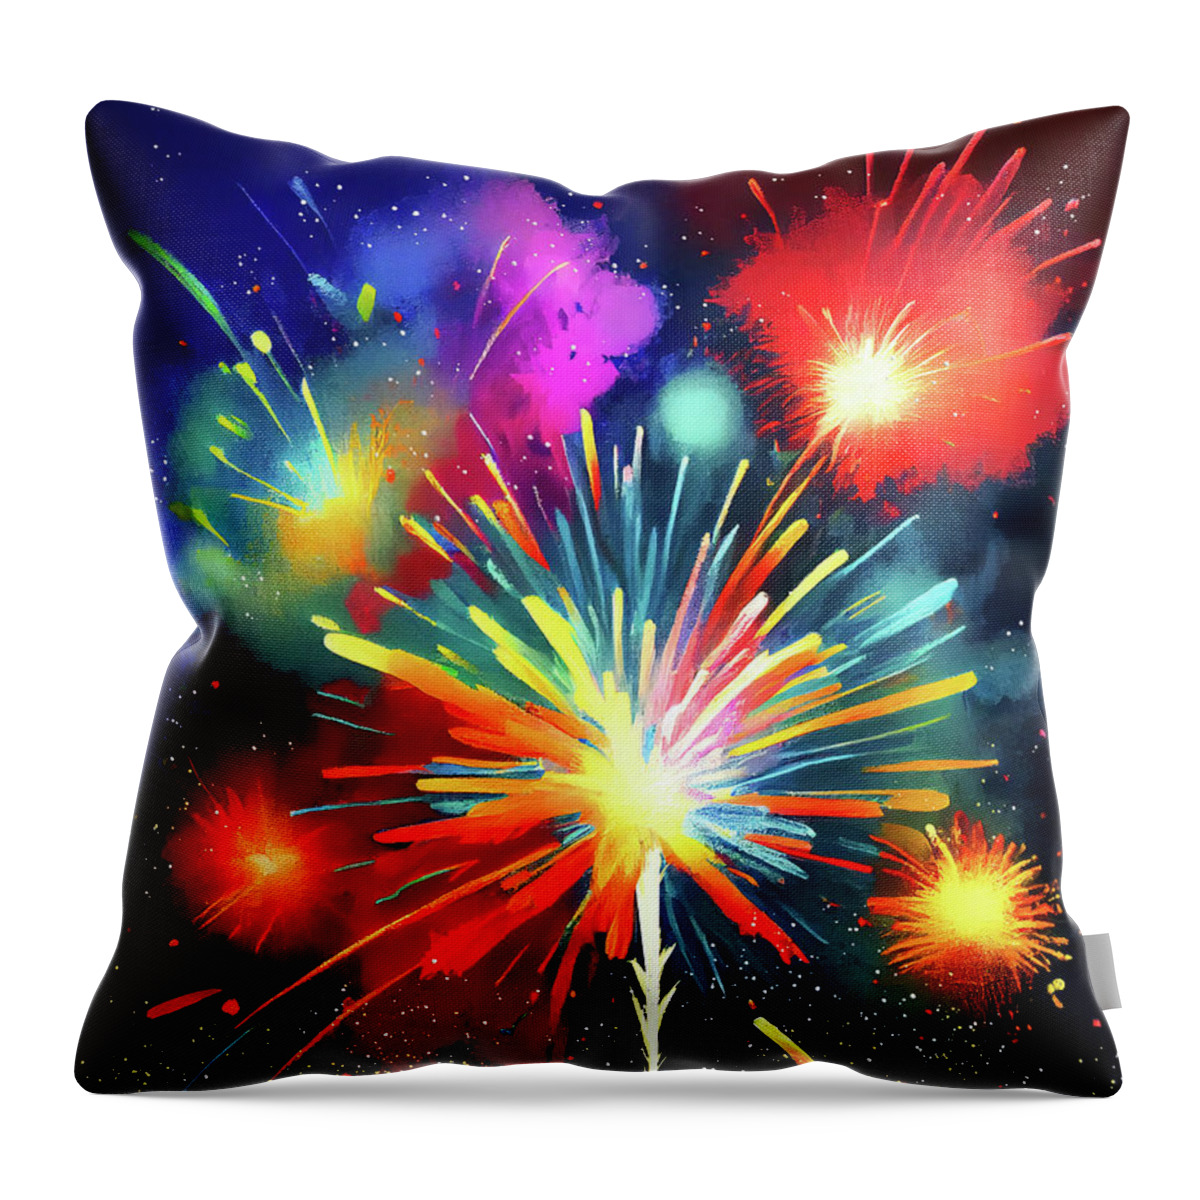 Abstract Throw Pillow featuring the digital art Skies Aglow With Fireworks by Mark E Tisdale